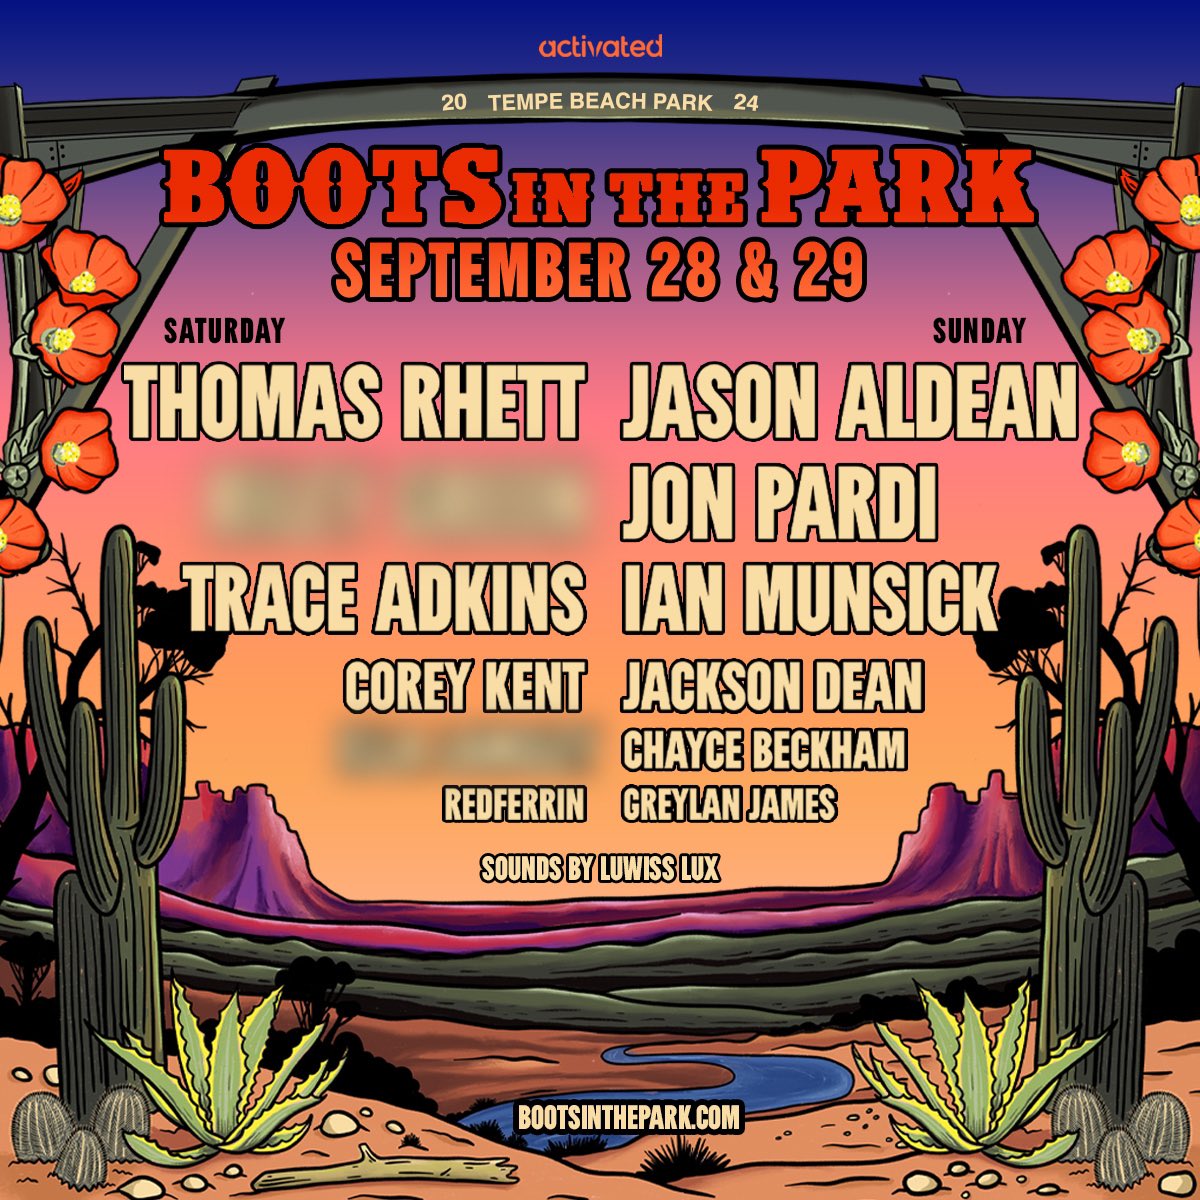 ON SALE NOW! Catch Jackson Dean in Tempe, AZ at @ParkBoots on Sunday, September 29th. Get your tickets now at jacksondeanmusic.com/tour